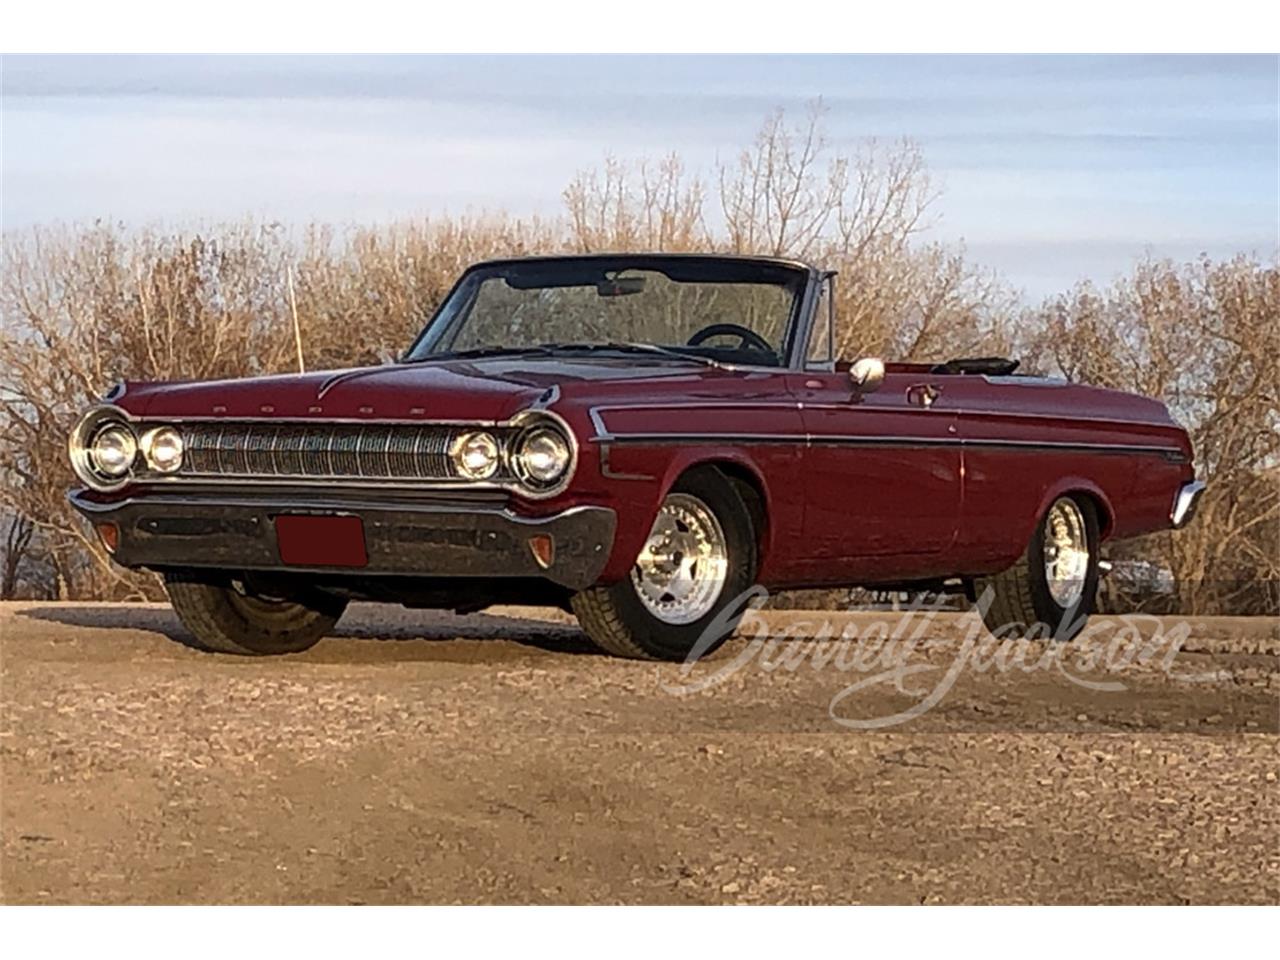 For Sale at Auction: 1964 Dodge Polara in Scottsdale, Arizona for sale in Scottsdale, AZ